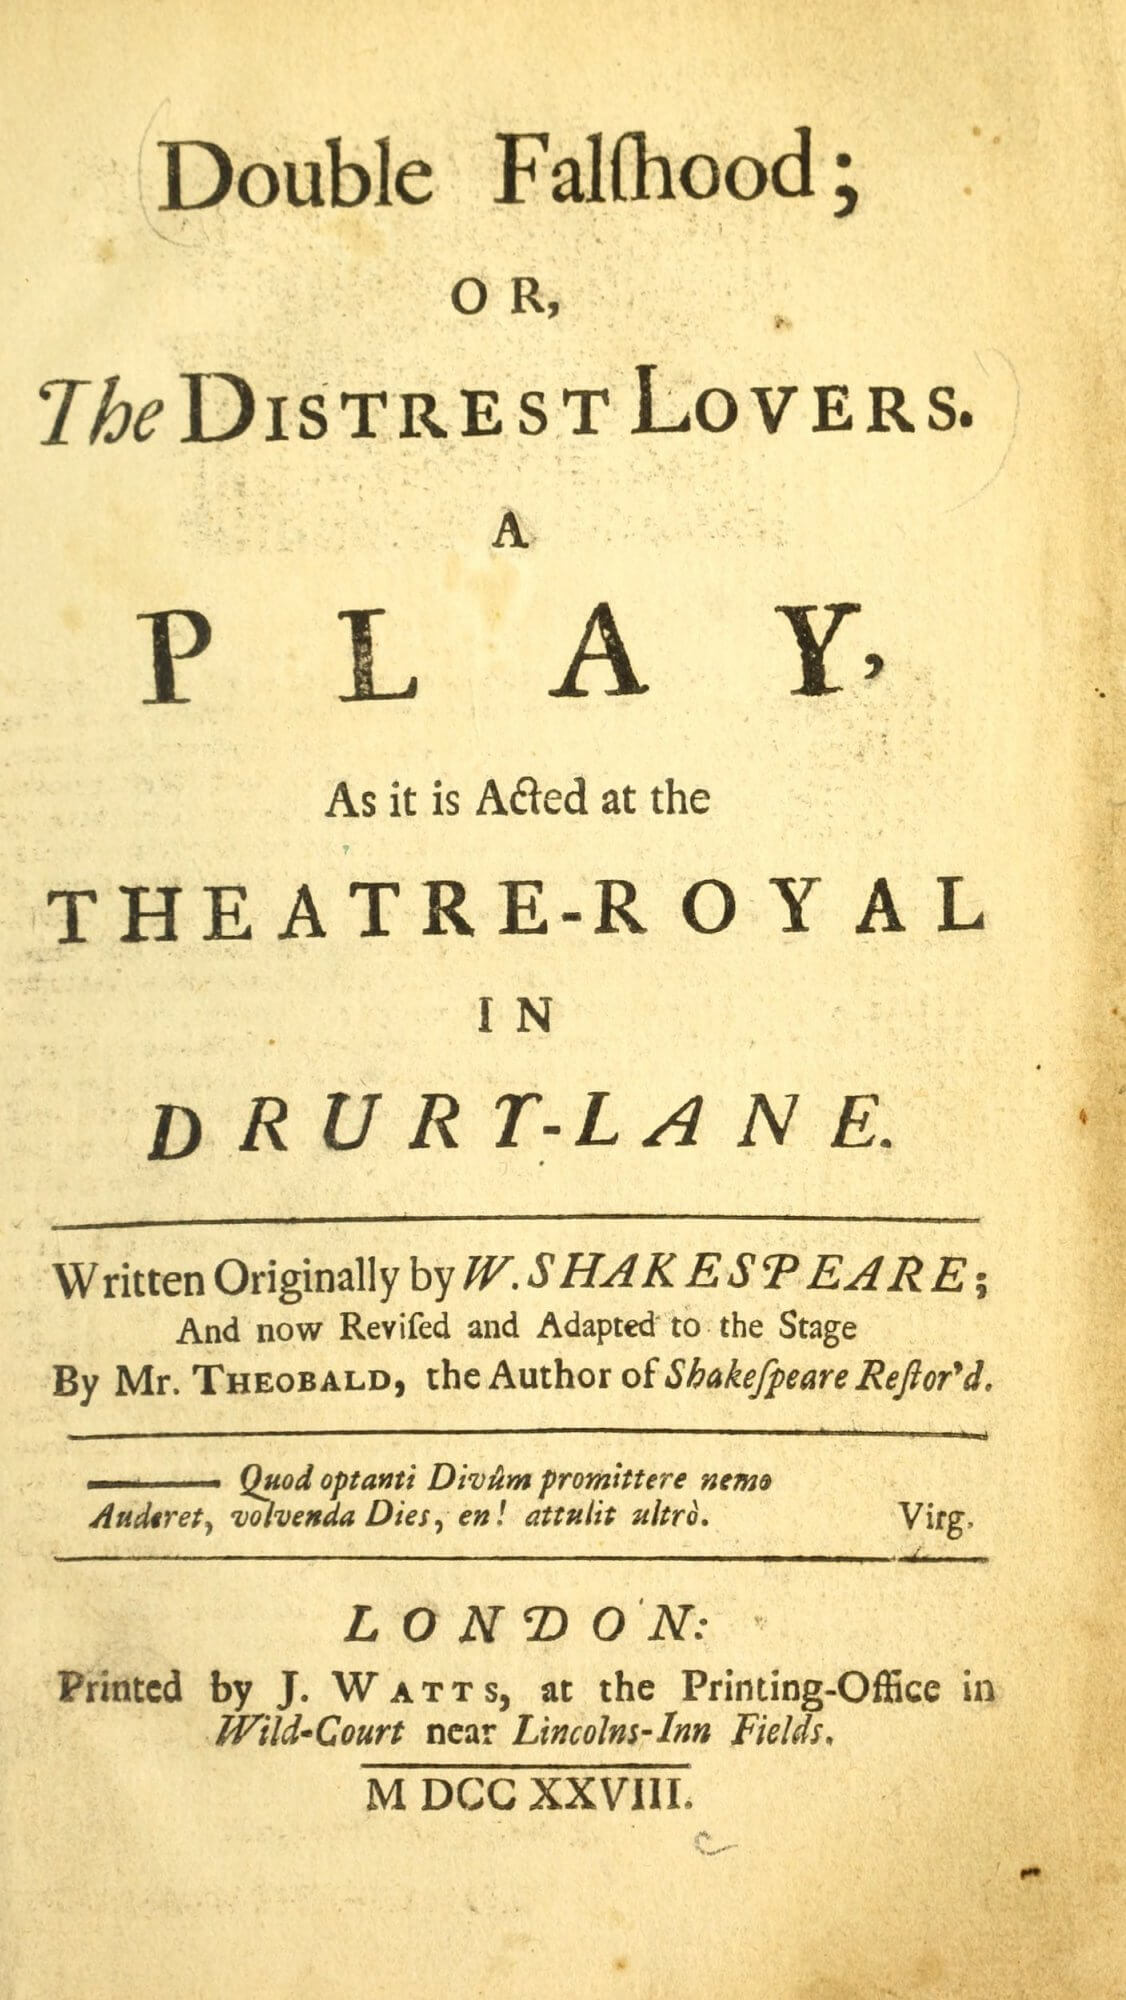 Like that of most English playbooks, this title page indicates where the play was first performed as well as its title and author.